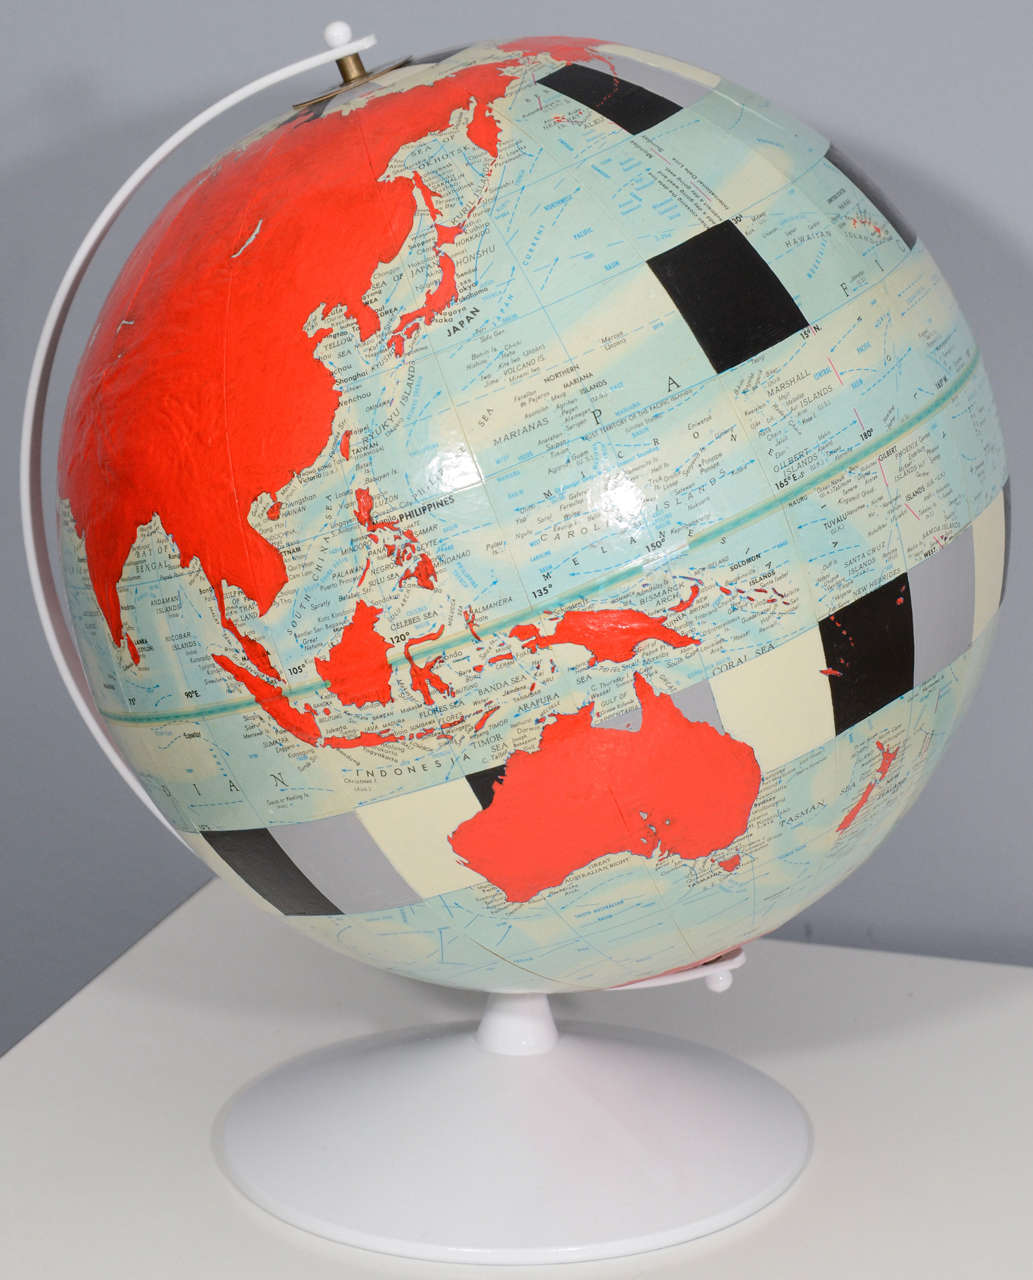 Vintage, hand-painted globe by contemporary pop artist, Dylan Egon.